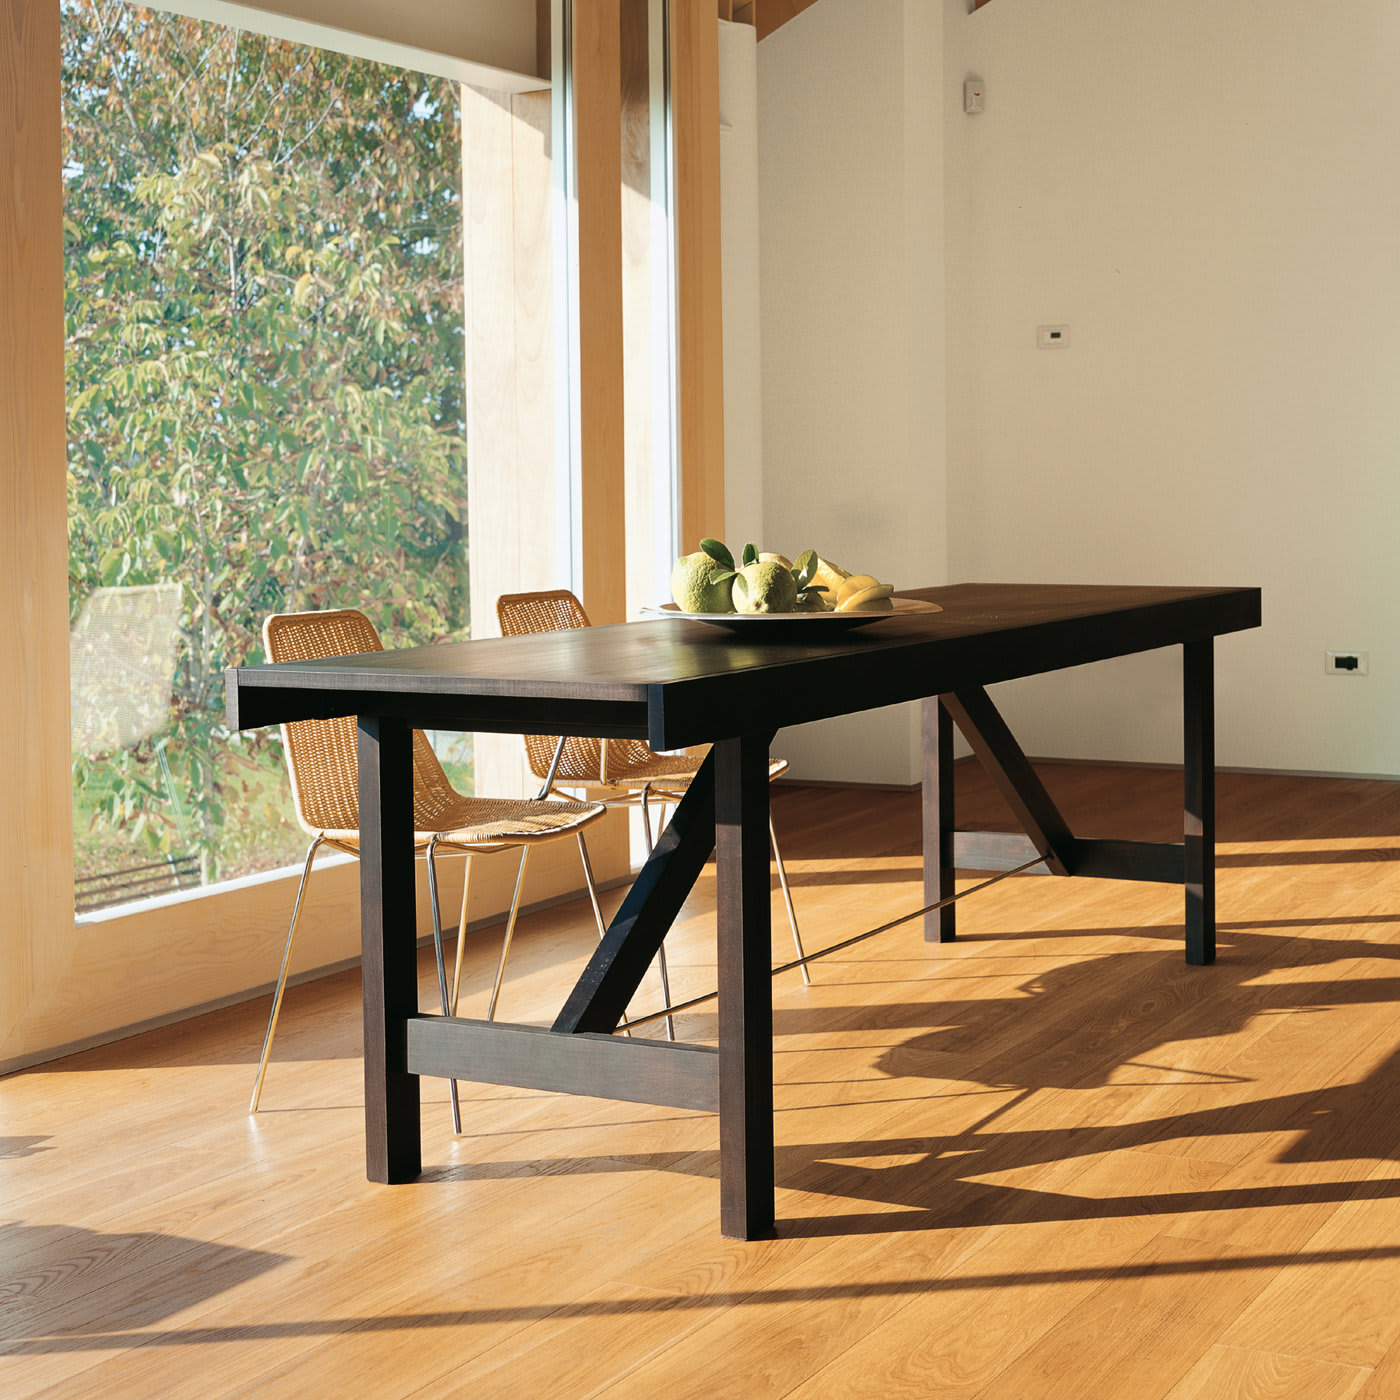 Capriata Brown Extendable Dining Table by Carlo Cumini - Horm